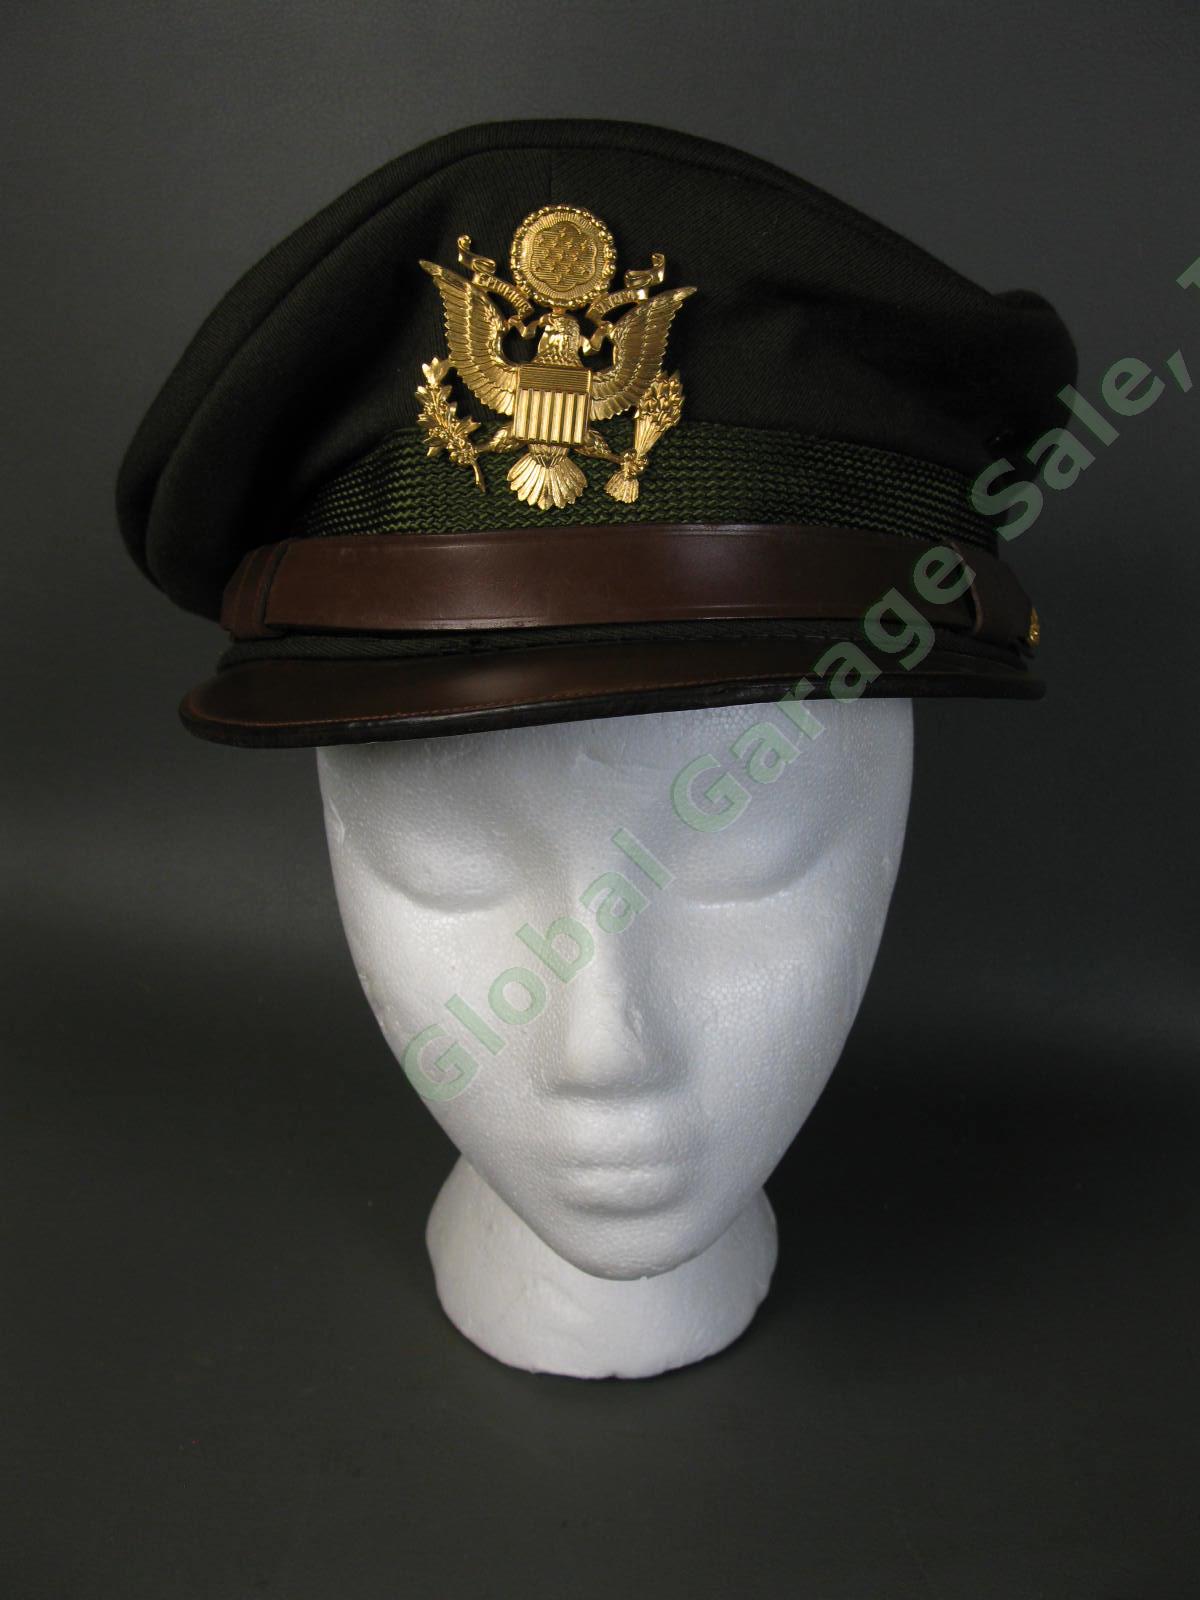 Original WWII 1942 US Army Military Service Officer Wool Olive Drab Dark Cap Hat